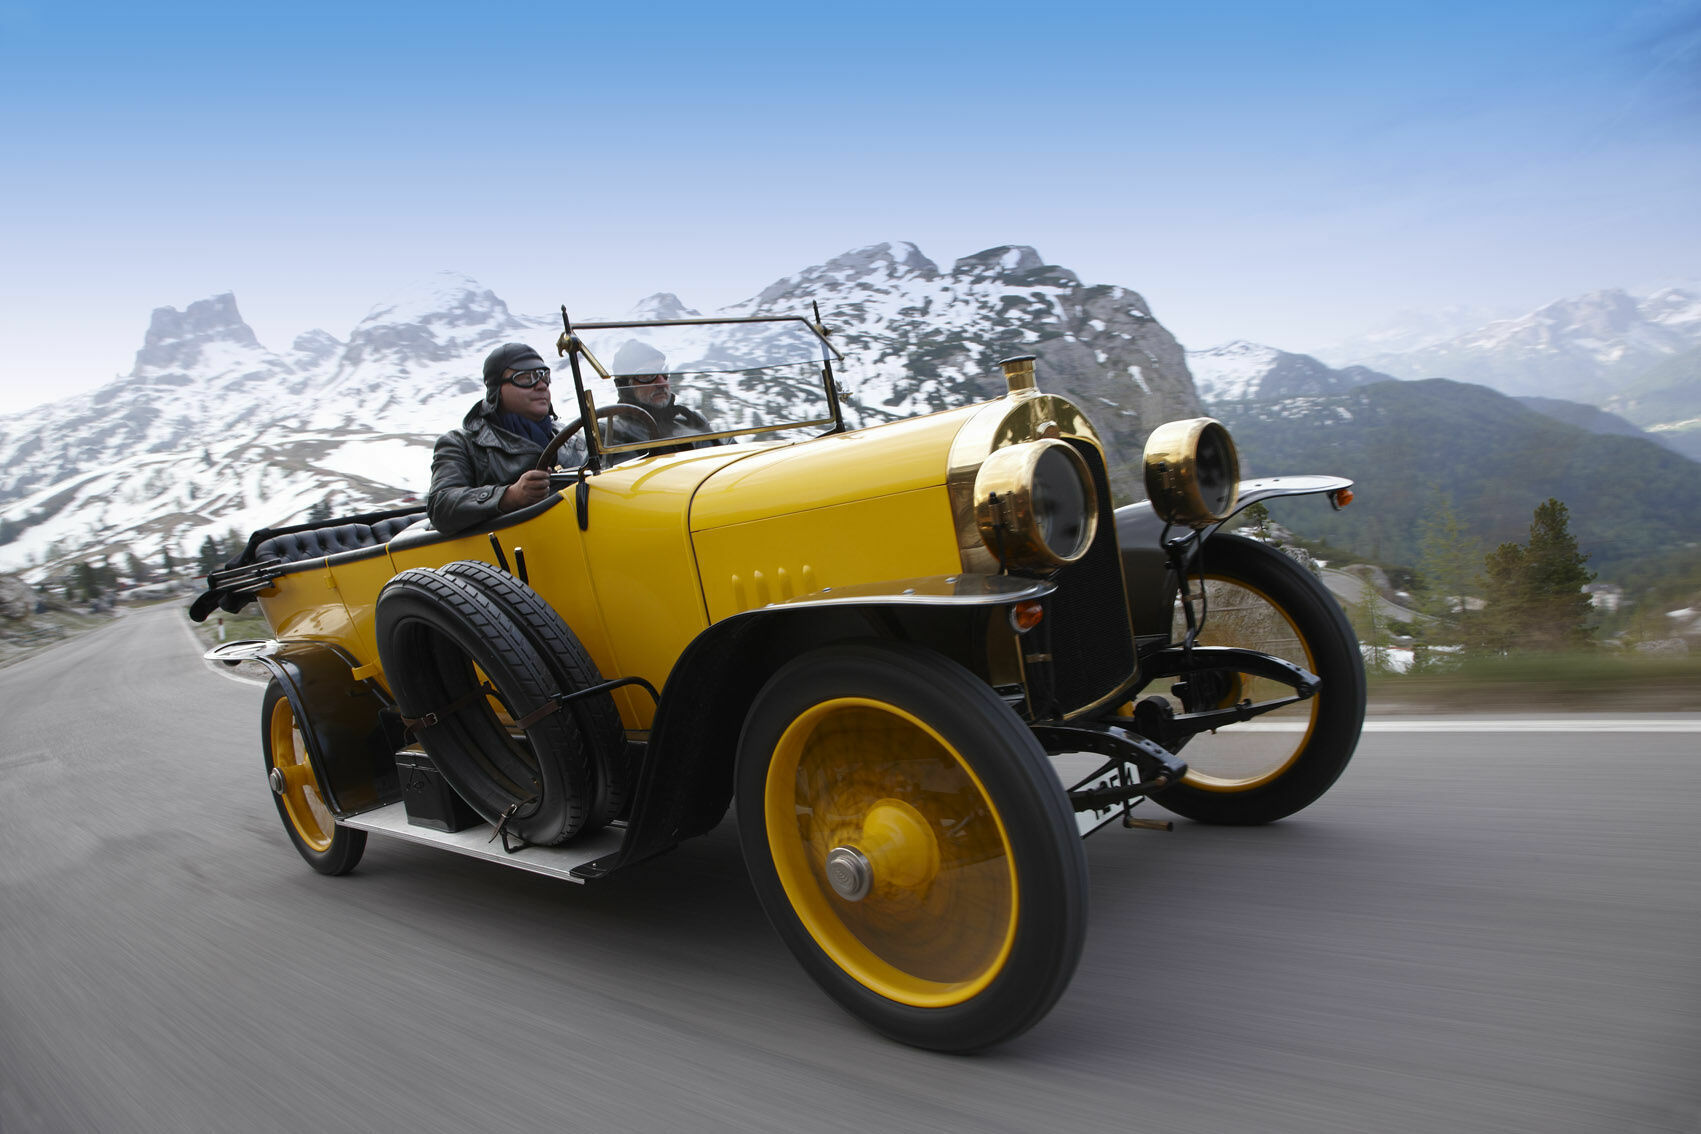 “Audi, 1909 to 1940 – the cars, the brand, the company”